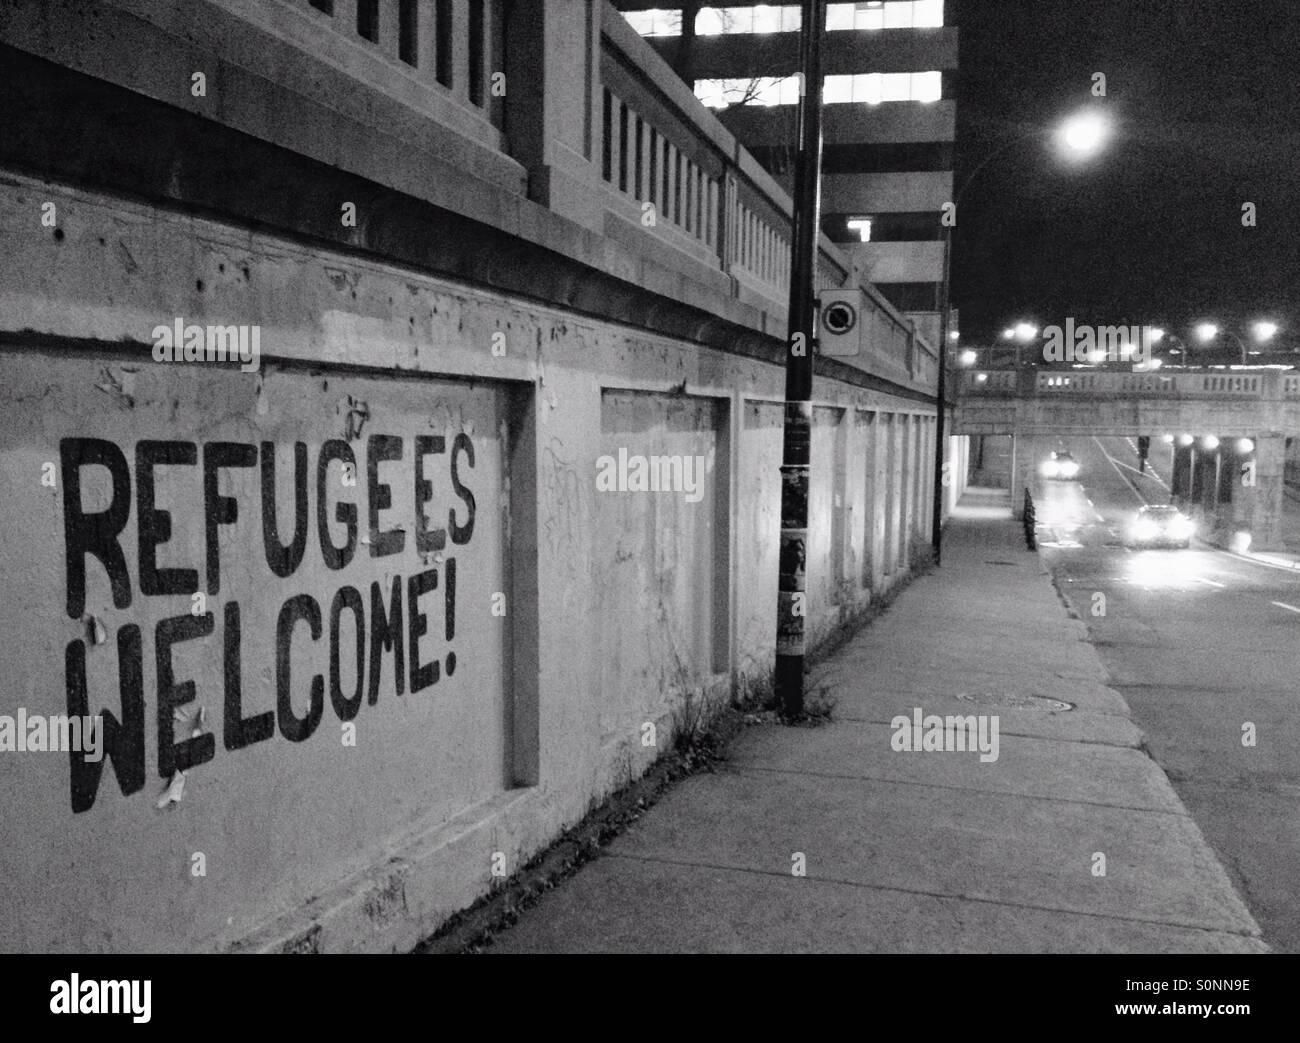 Refugees welcome sign Montreal Stock Photo